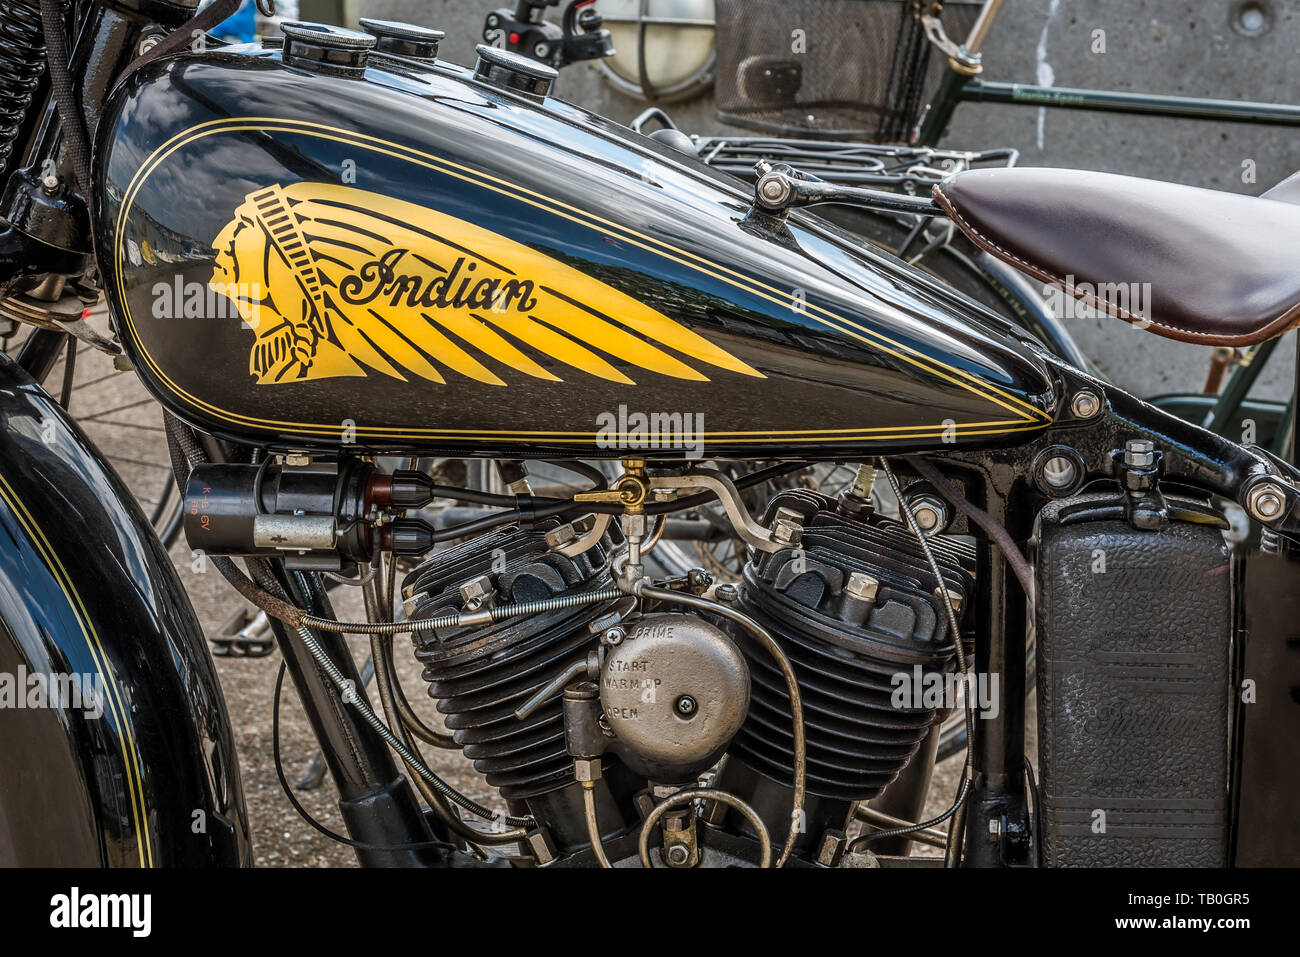 Indian black and gold motorbike with a logo on the tank, MAy 25 2019, Copenhagen, Denmark Stock Photo